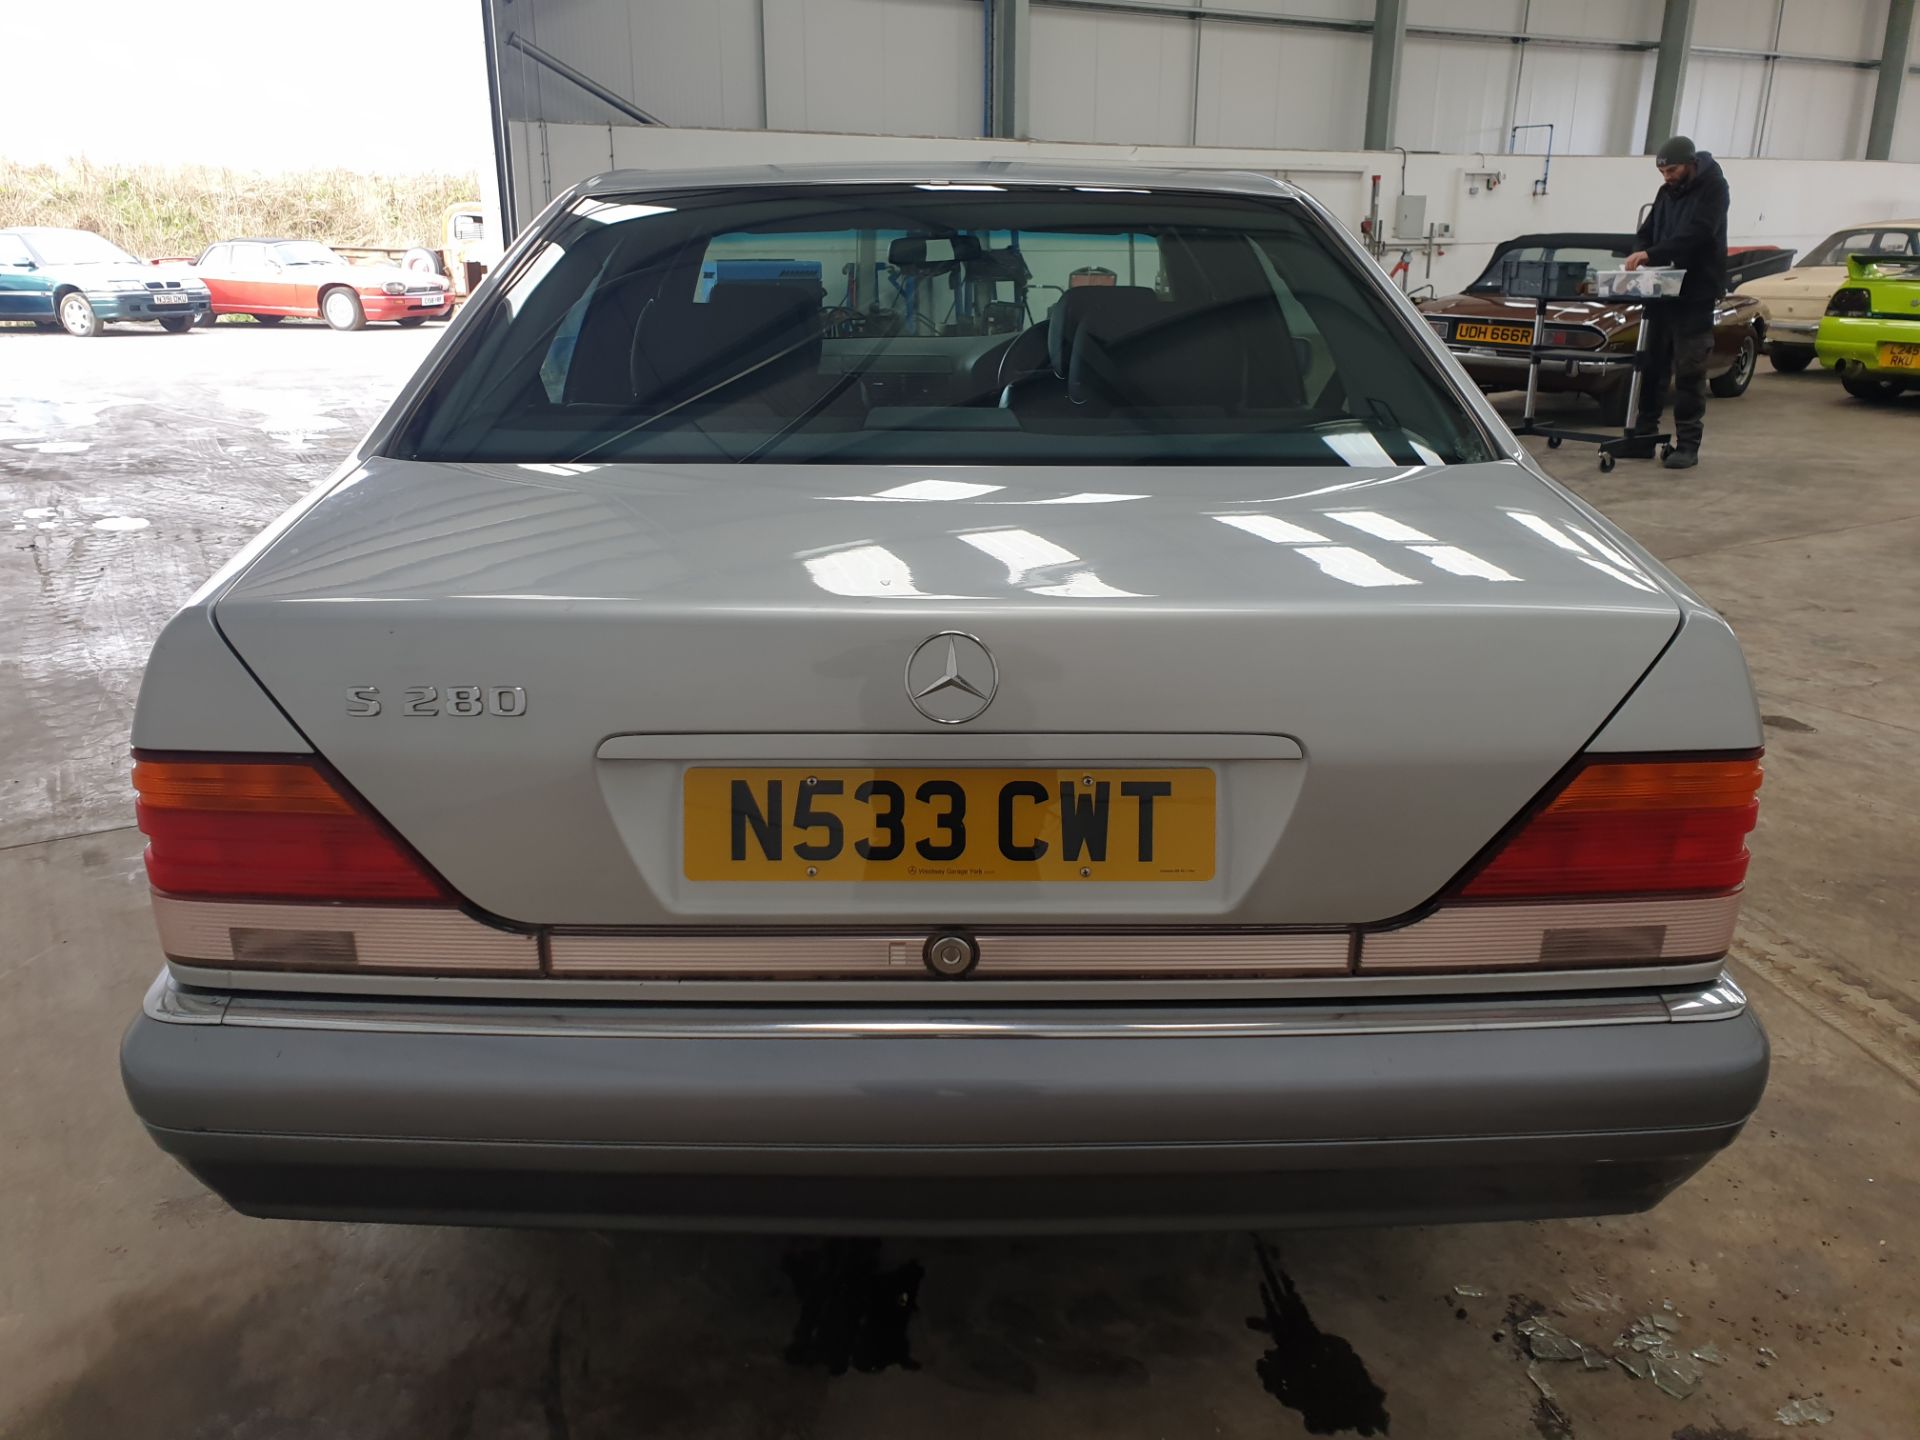 1995 Mercedes S280 - Image 4 of 14